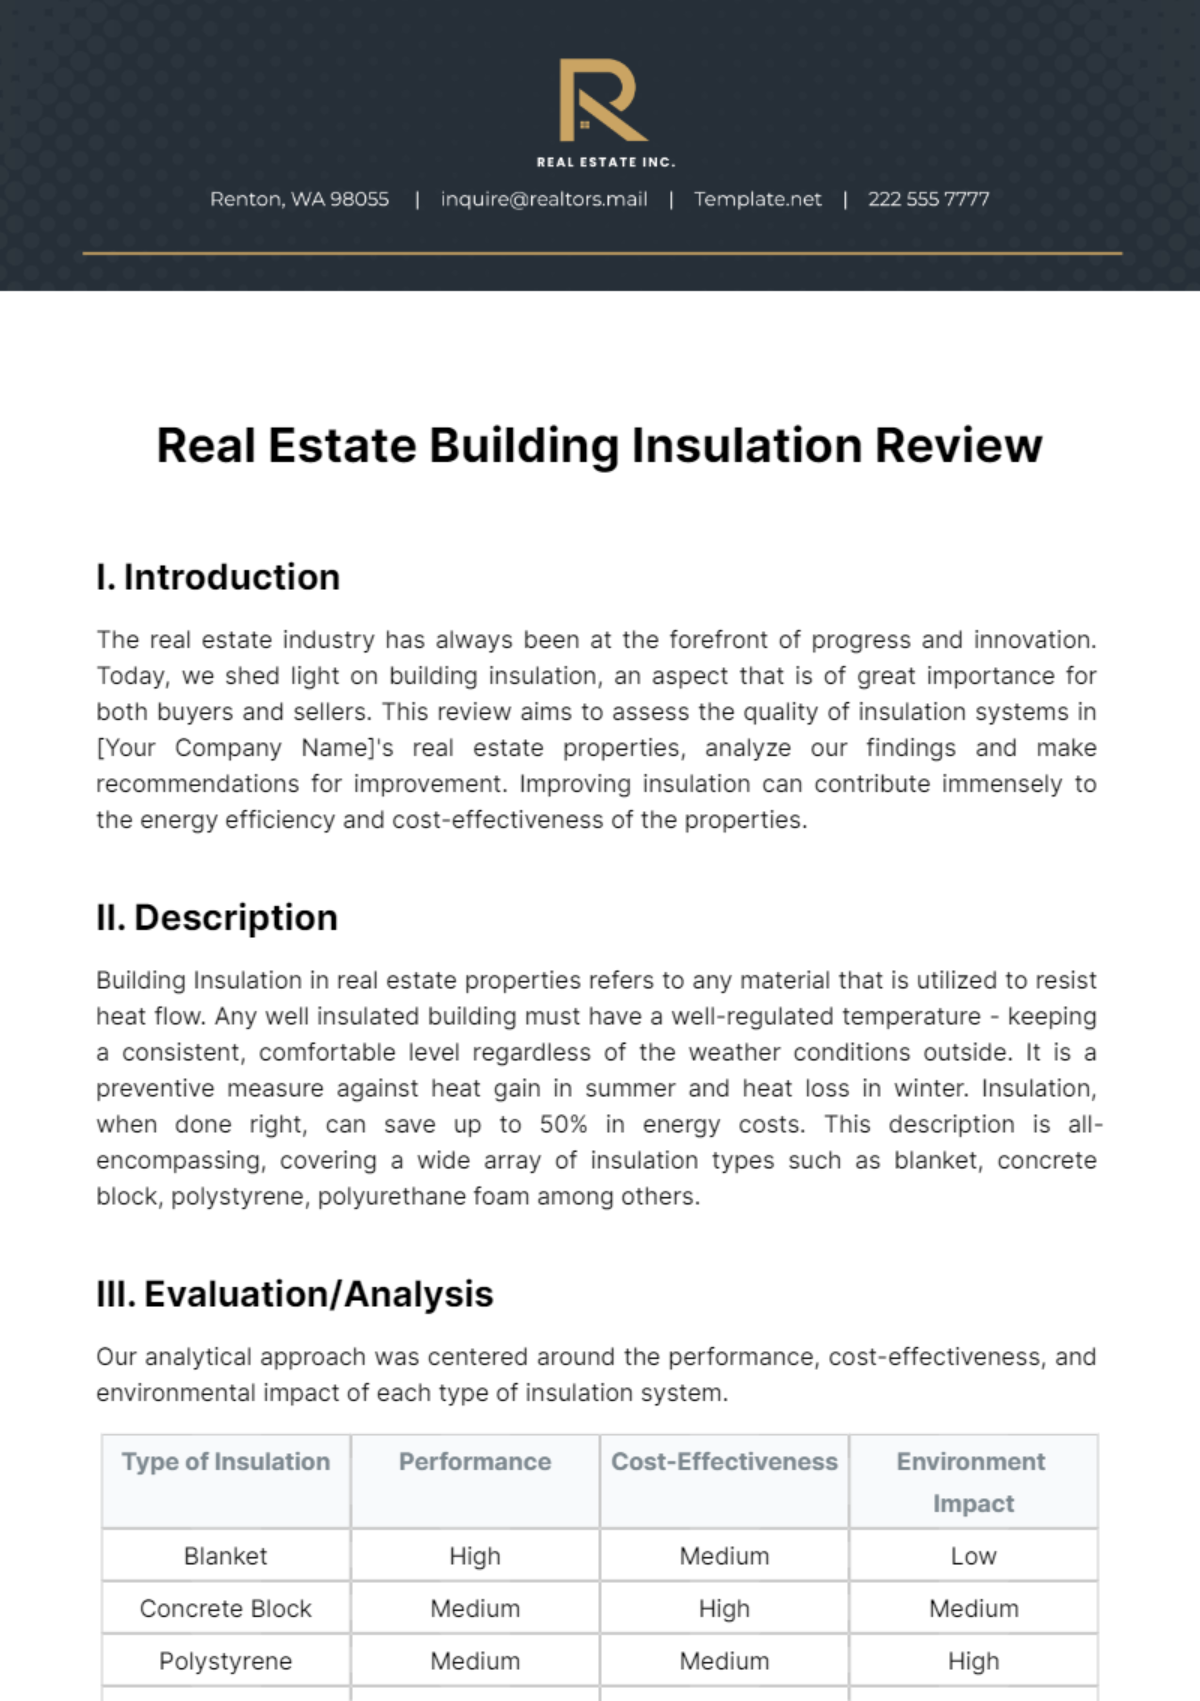 Real Estate Building Insulation Review Template